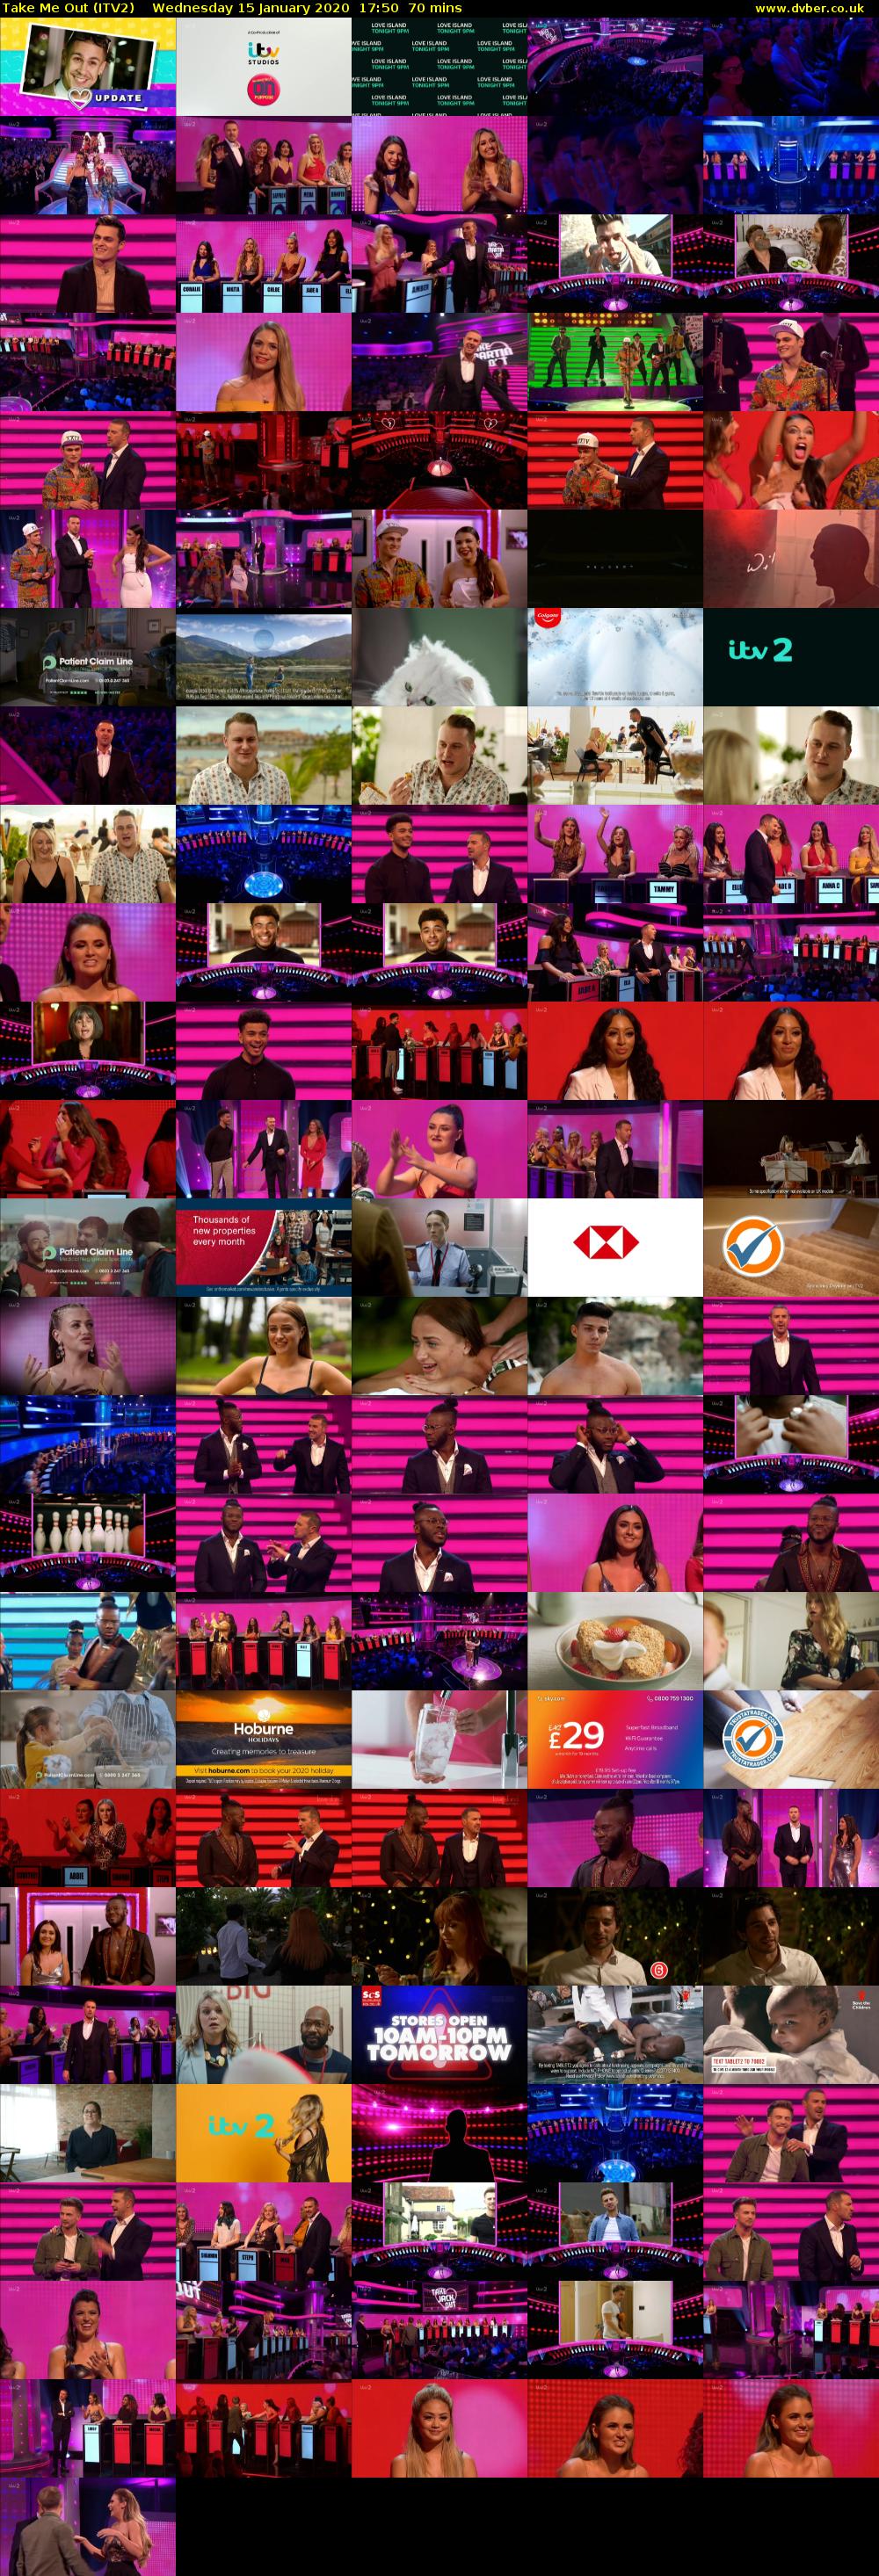 Take Me Out (ITV2) Wednesday 15 January 2020 17:50 - 19:00